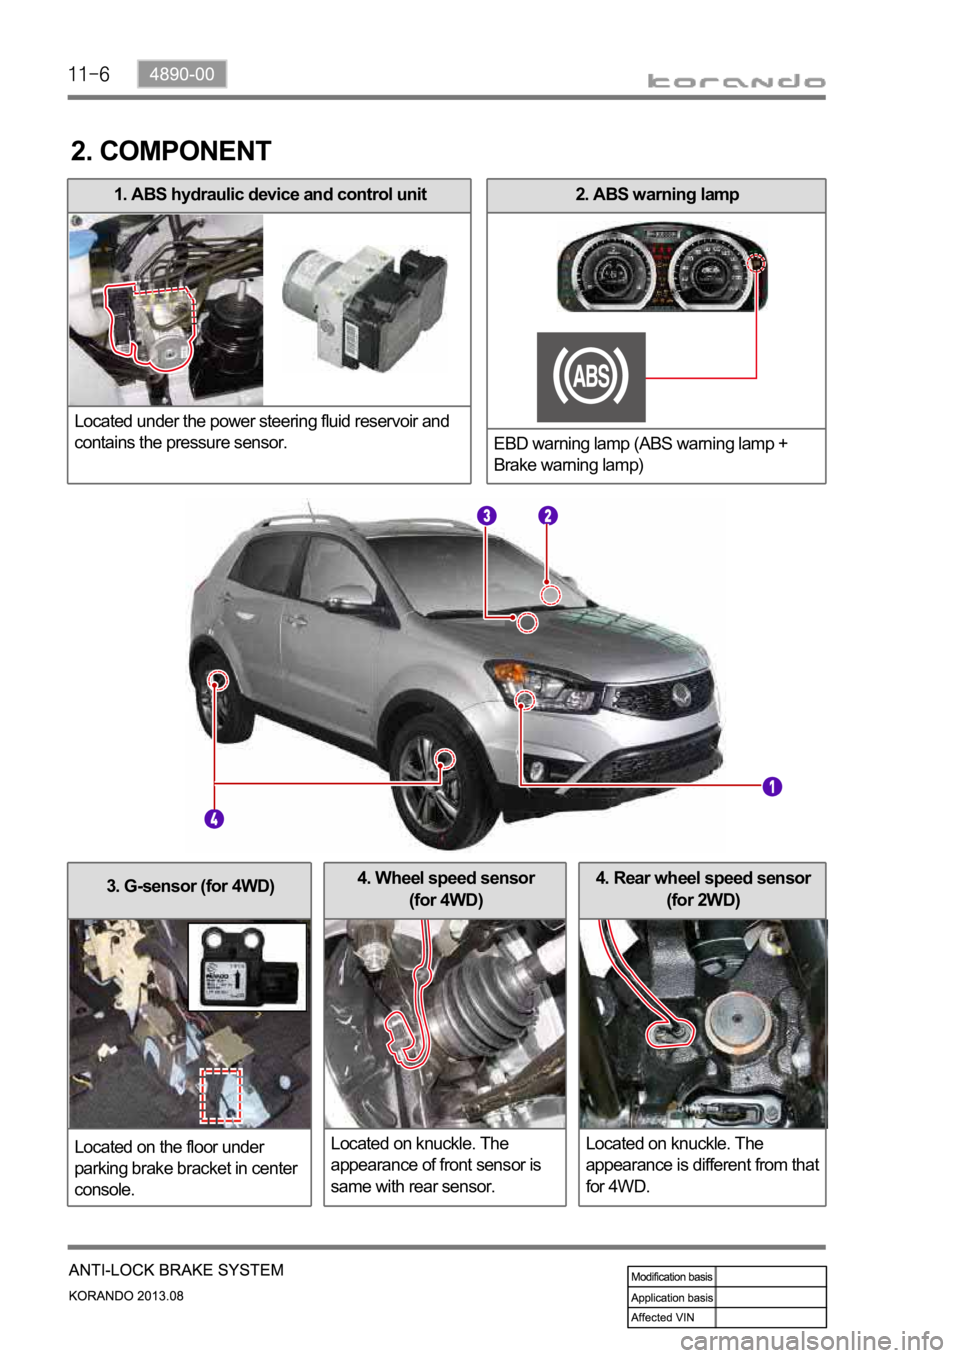 SSANGYONG KORANDO 2013 Workshop Manual 3. G-sensor (for 4WD)
Located on the floor under 
parking brake bracket in center 
console.4. Rear wheel speed sensor 
(for 2WD)
Located on knuckle. The 
appearance is different from that 
for 4WD.4. 